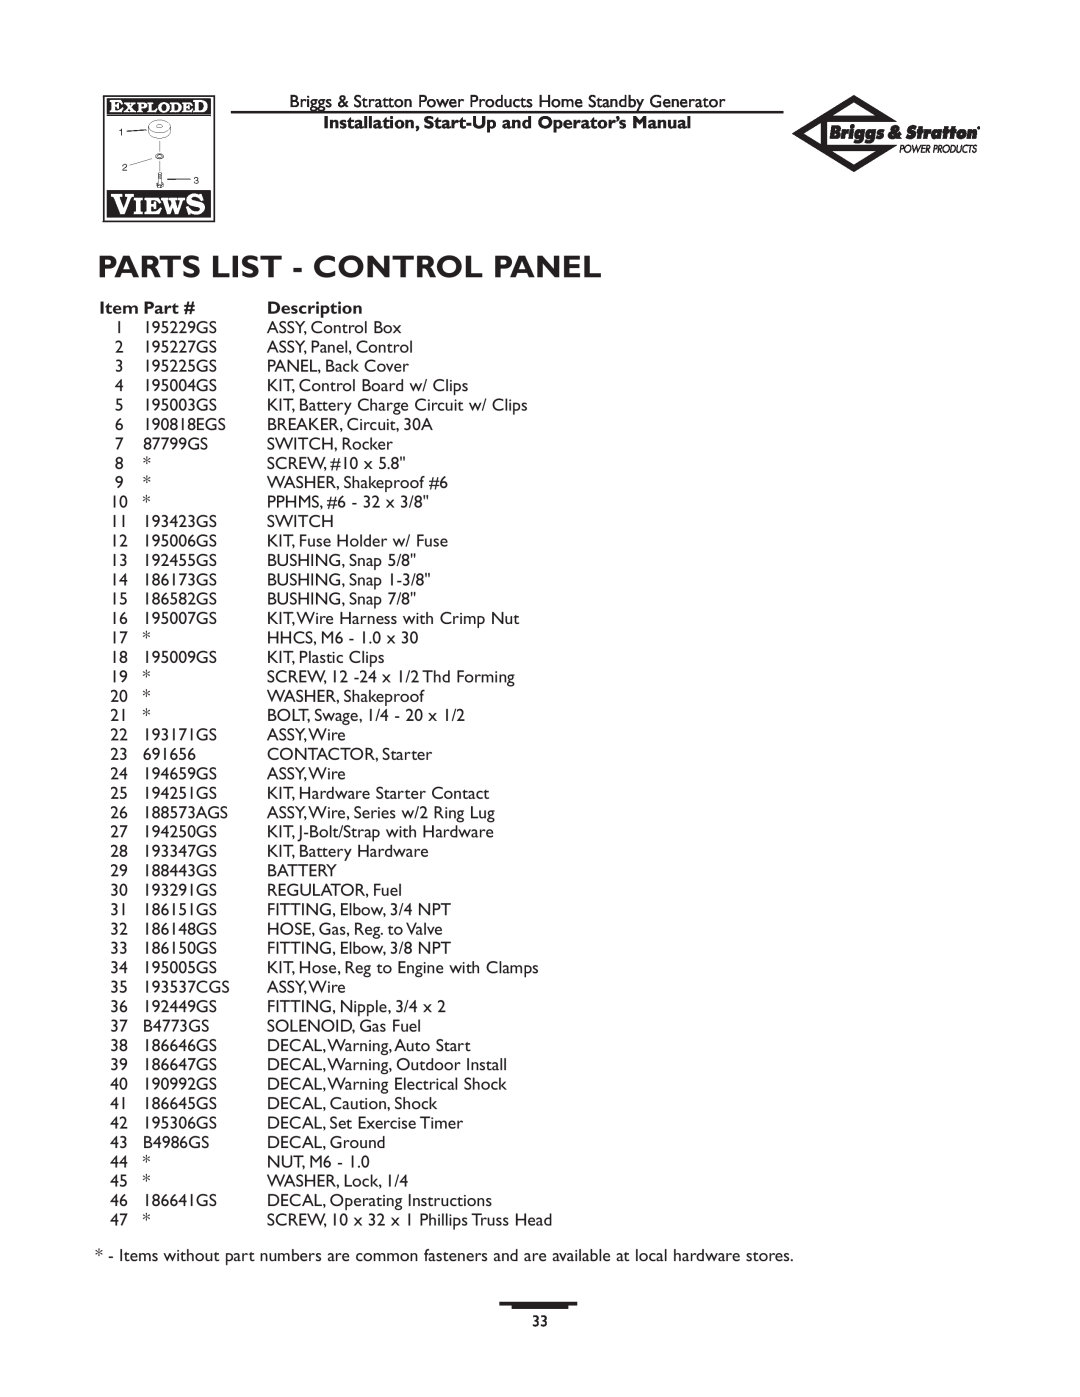 Briggs & Stratton 01897-0 manual Parts List - Control Panel, Installation, Start-Up and Operator’s Manual, Description 